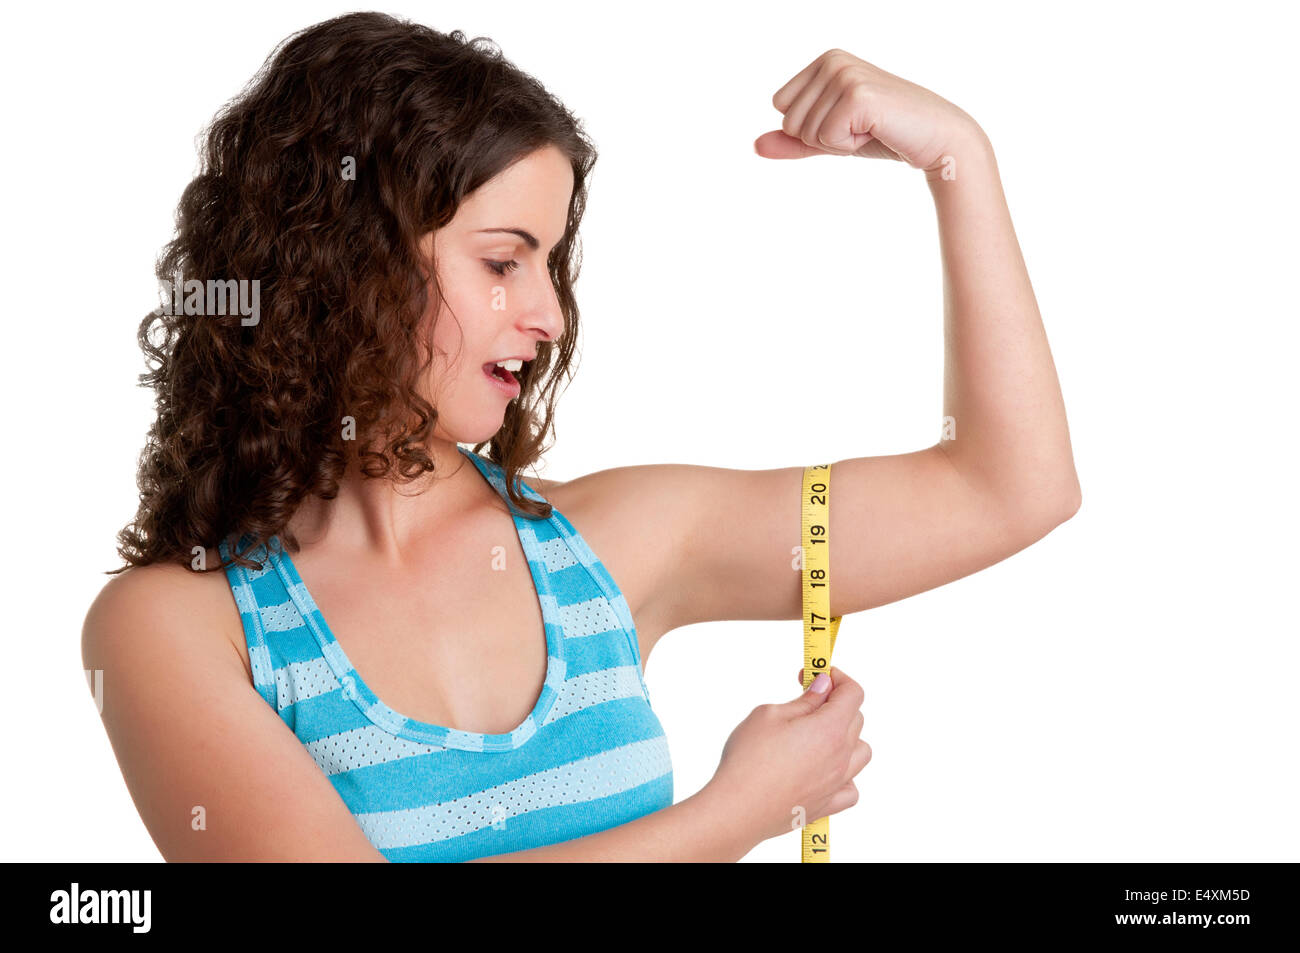 Surprised Woman measuring her biceps Banque D'Images